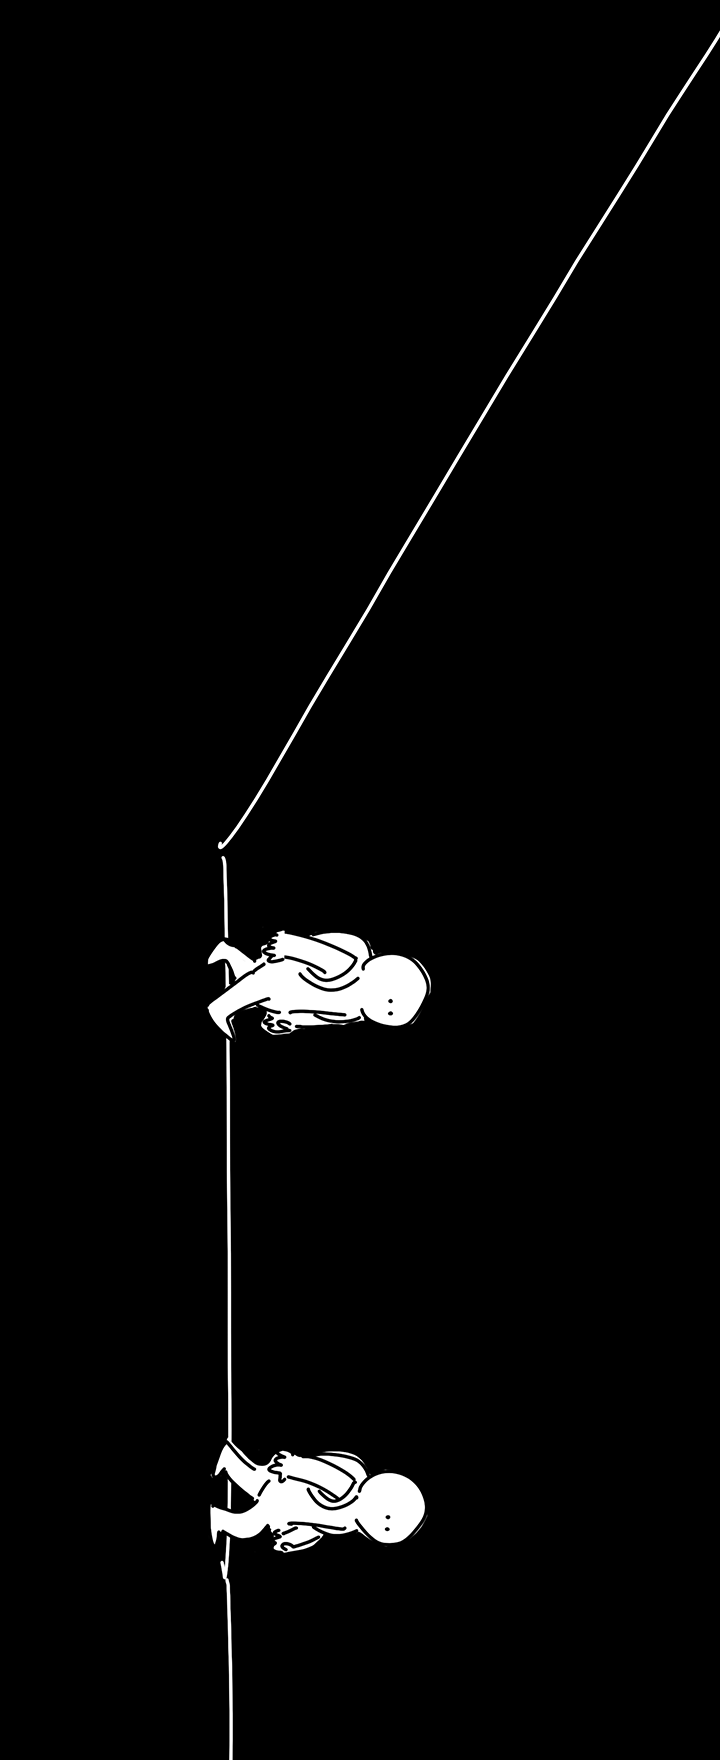 Panel 3: The kid continues to walk down the dark hallway. There's 2 iterations of them as they progress in the empty darkness.